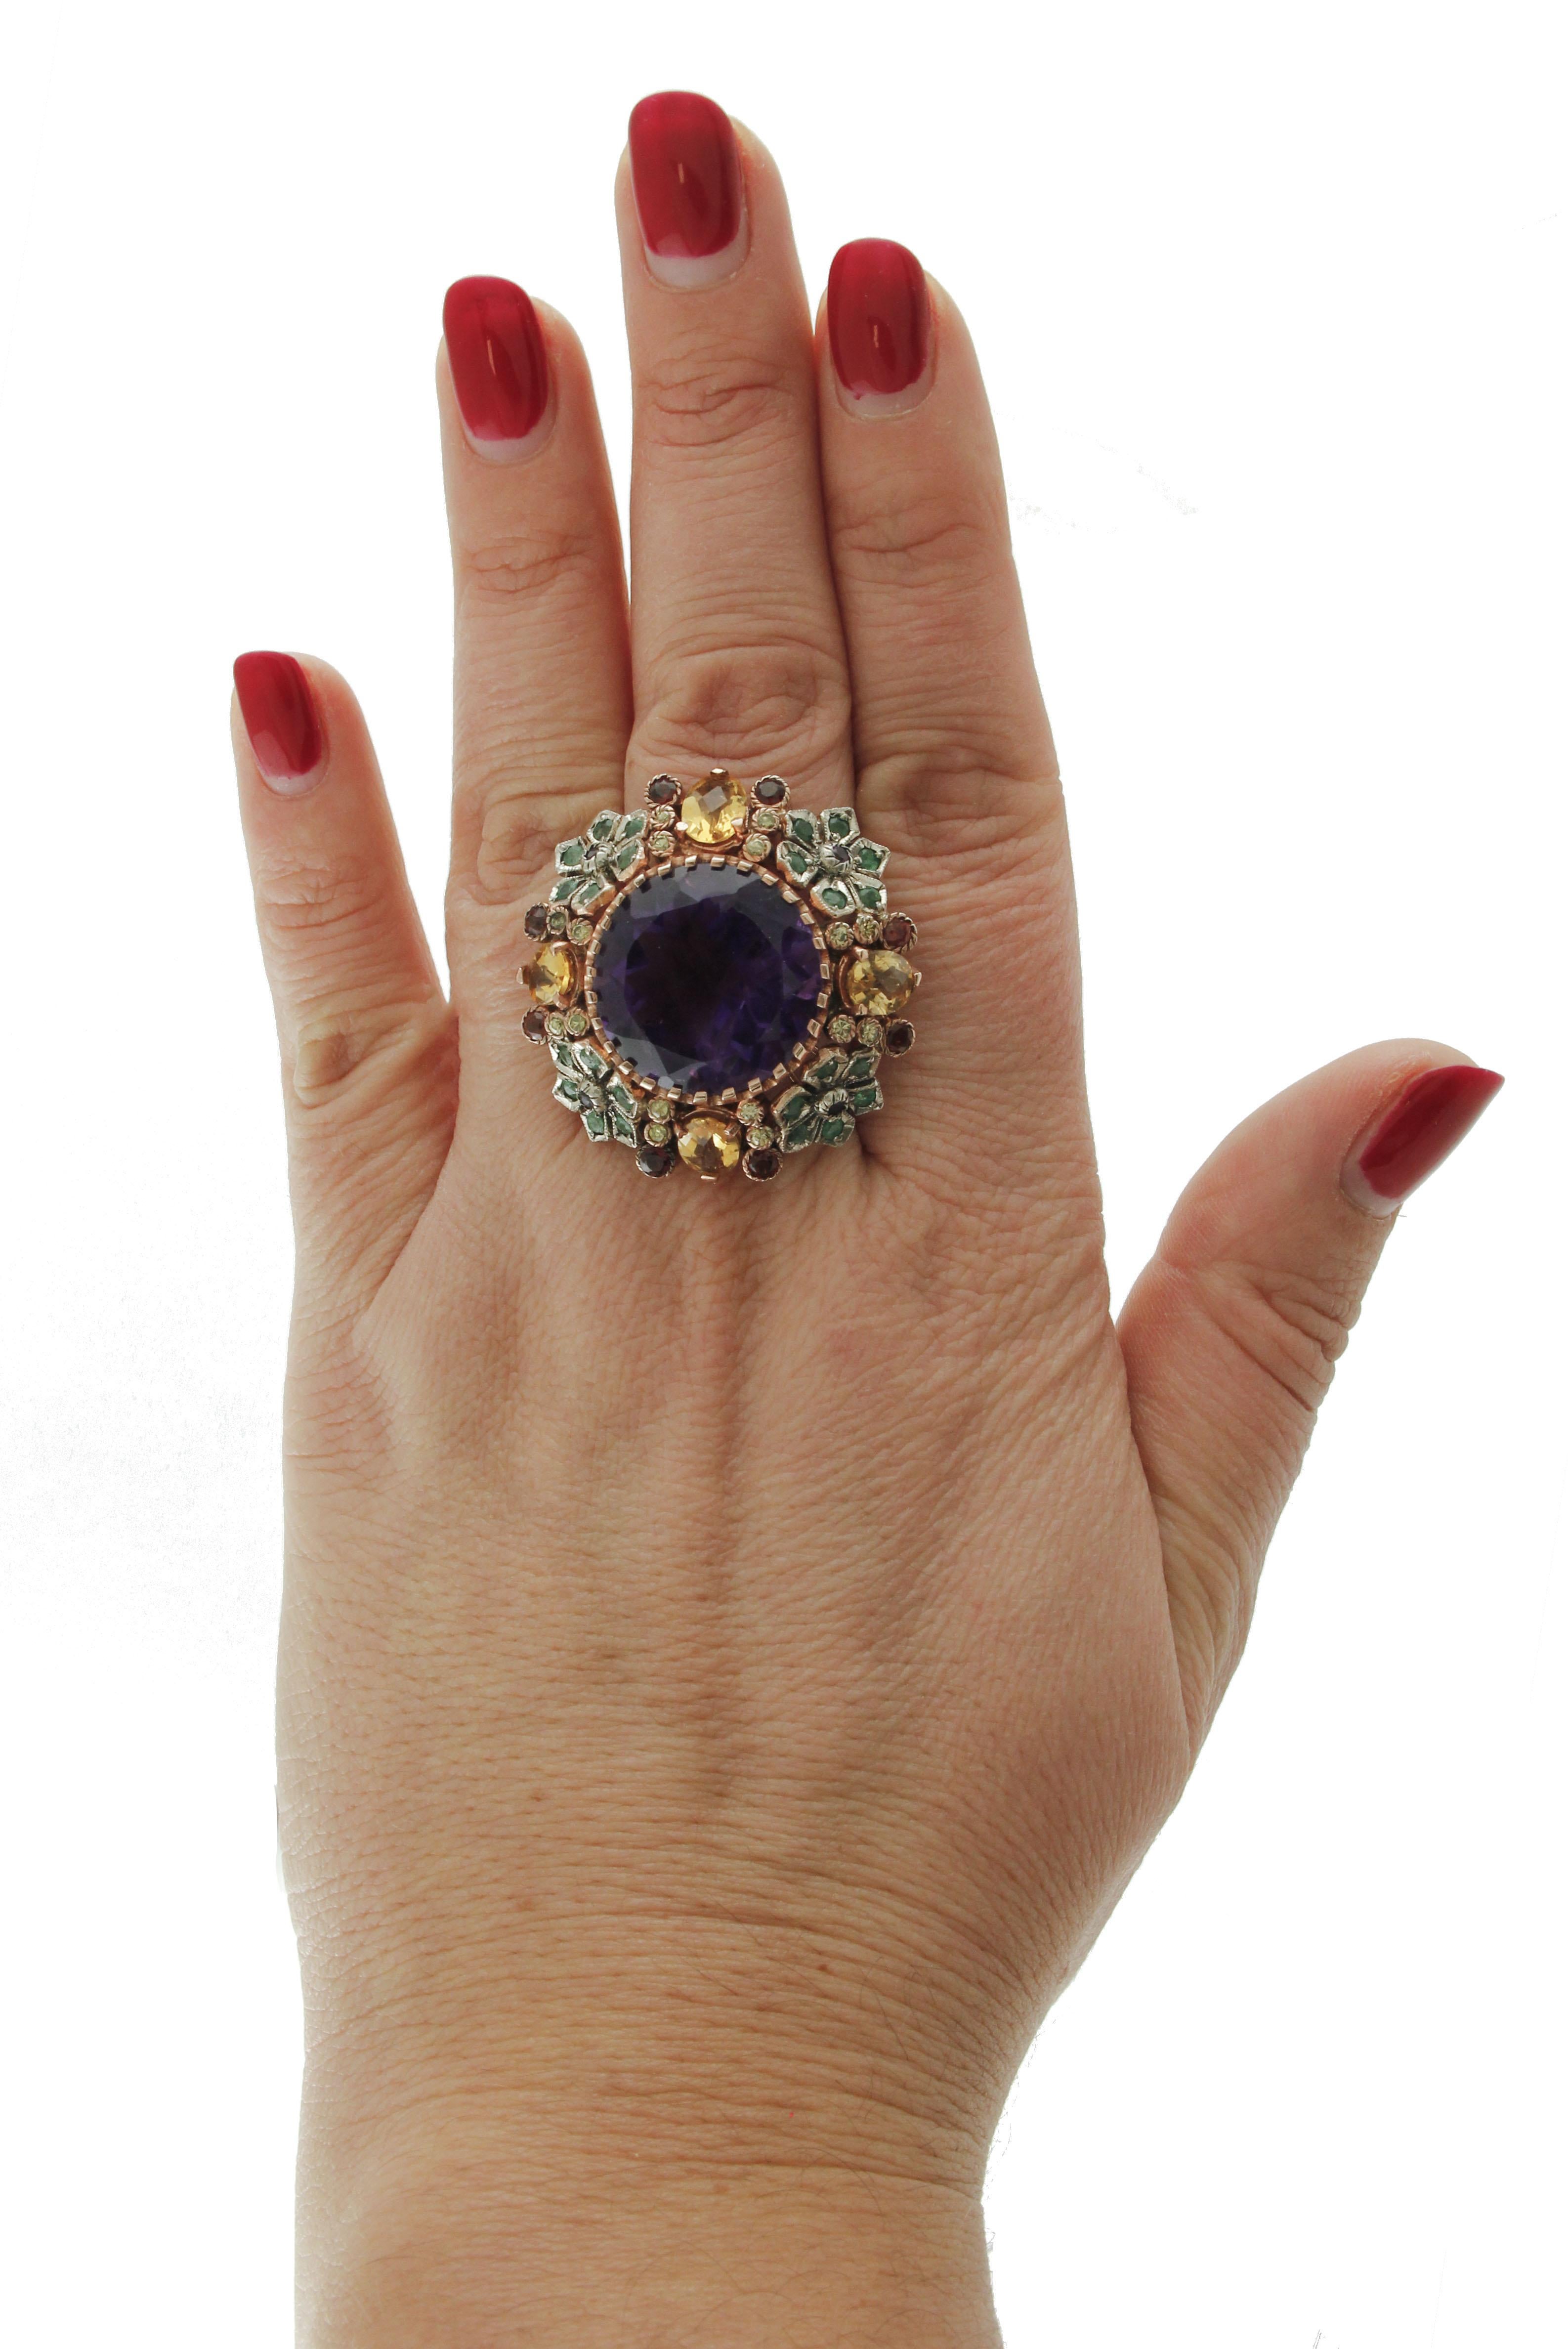 Diamonds Emeralds Amethysts Topazes Garnets Rose Gold and Silver Cocktail Ring 1